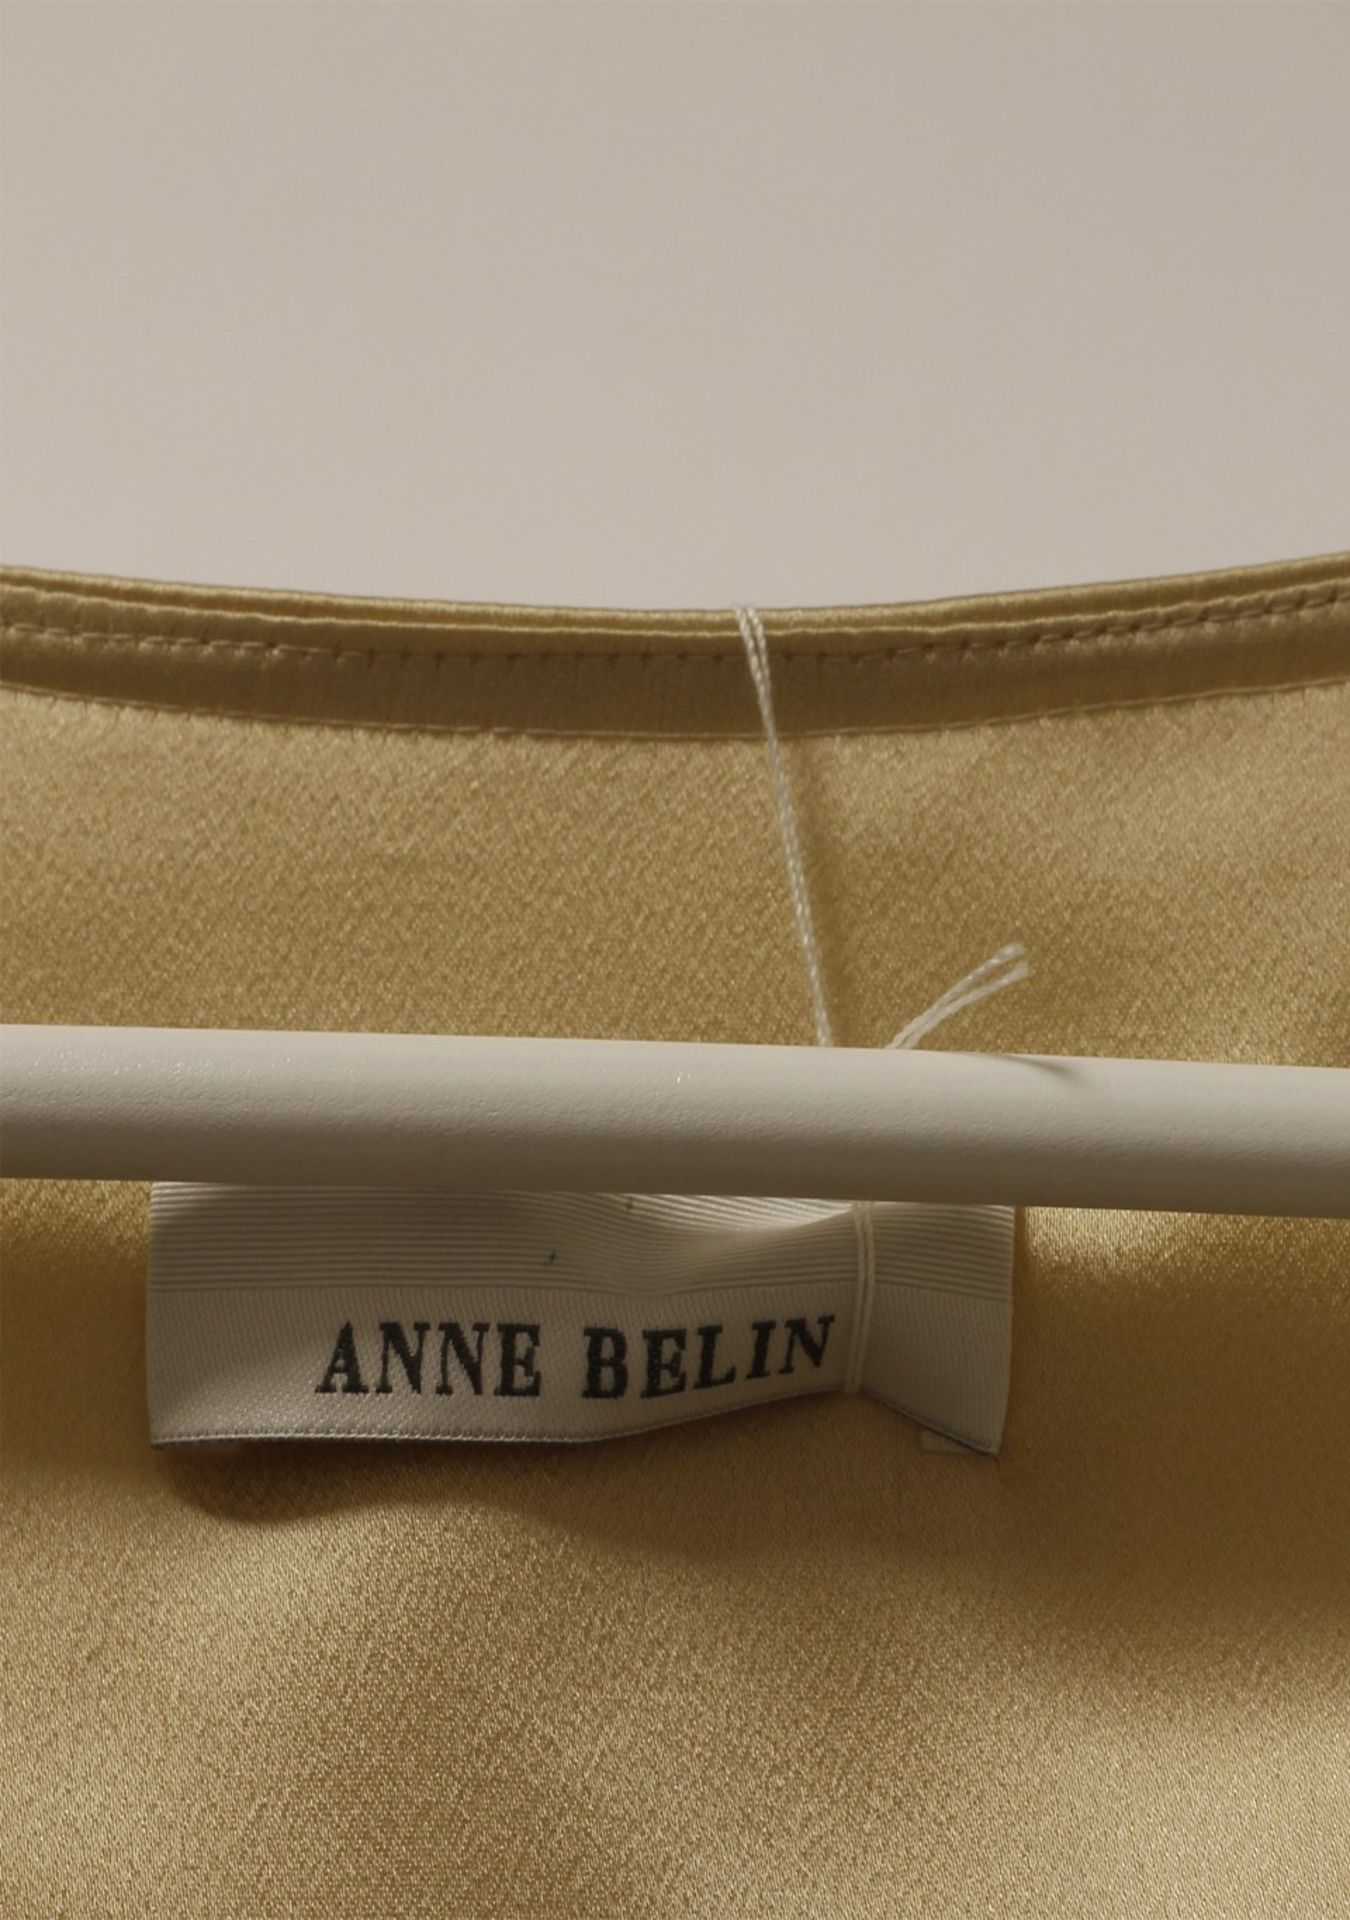 1 x Anne Belin Champagne Bolero - Size: 16 - Material: 50% Viscose, 50% Acetate - From a High End - Image 6 of 6